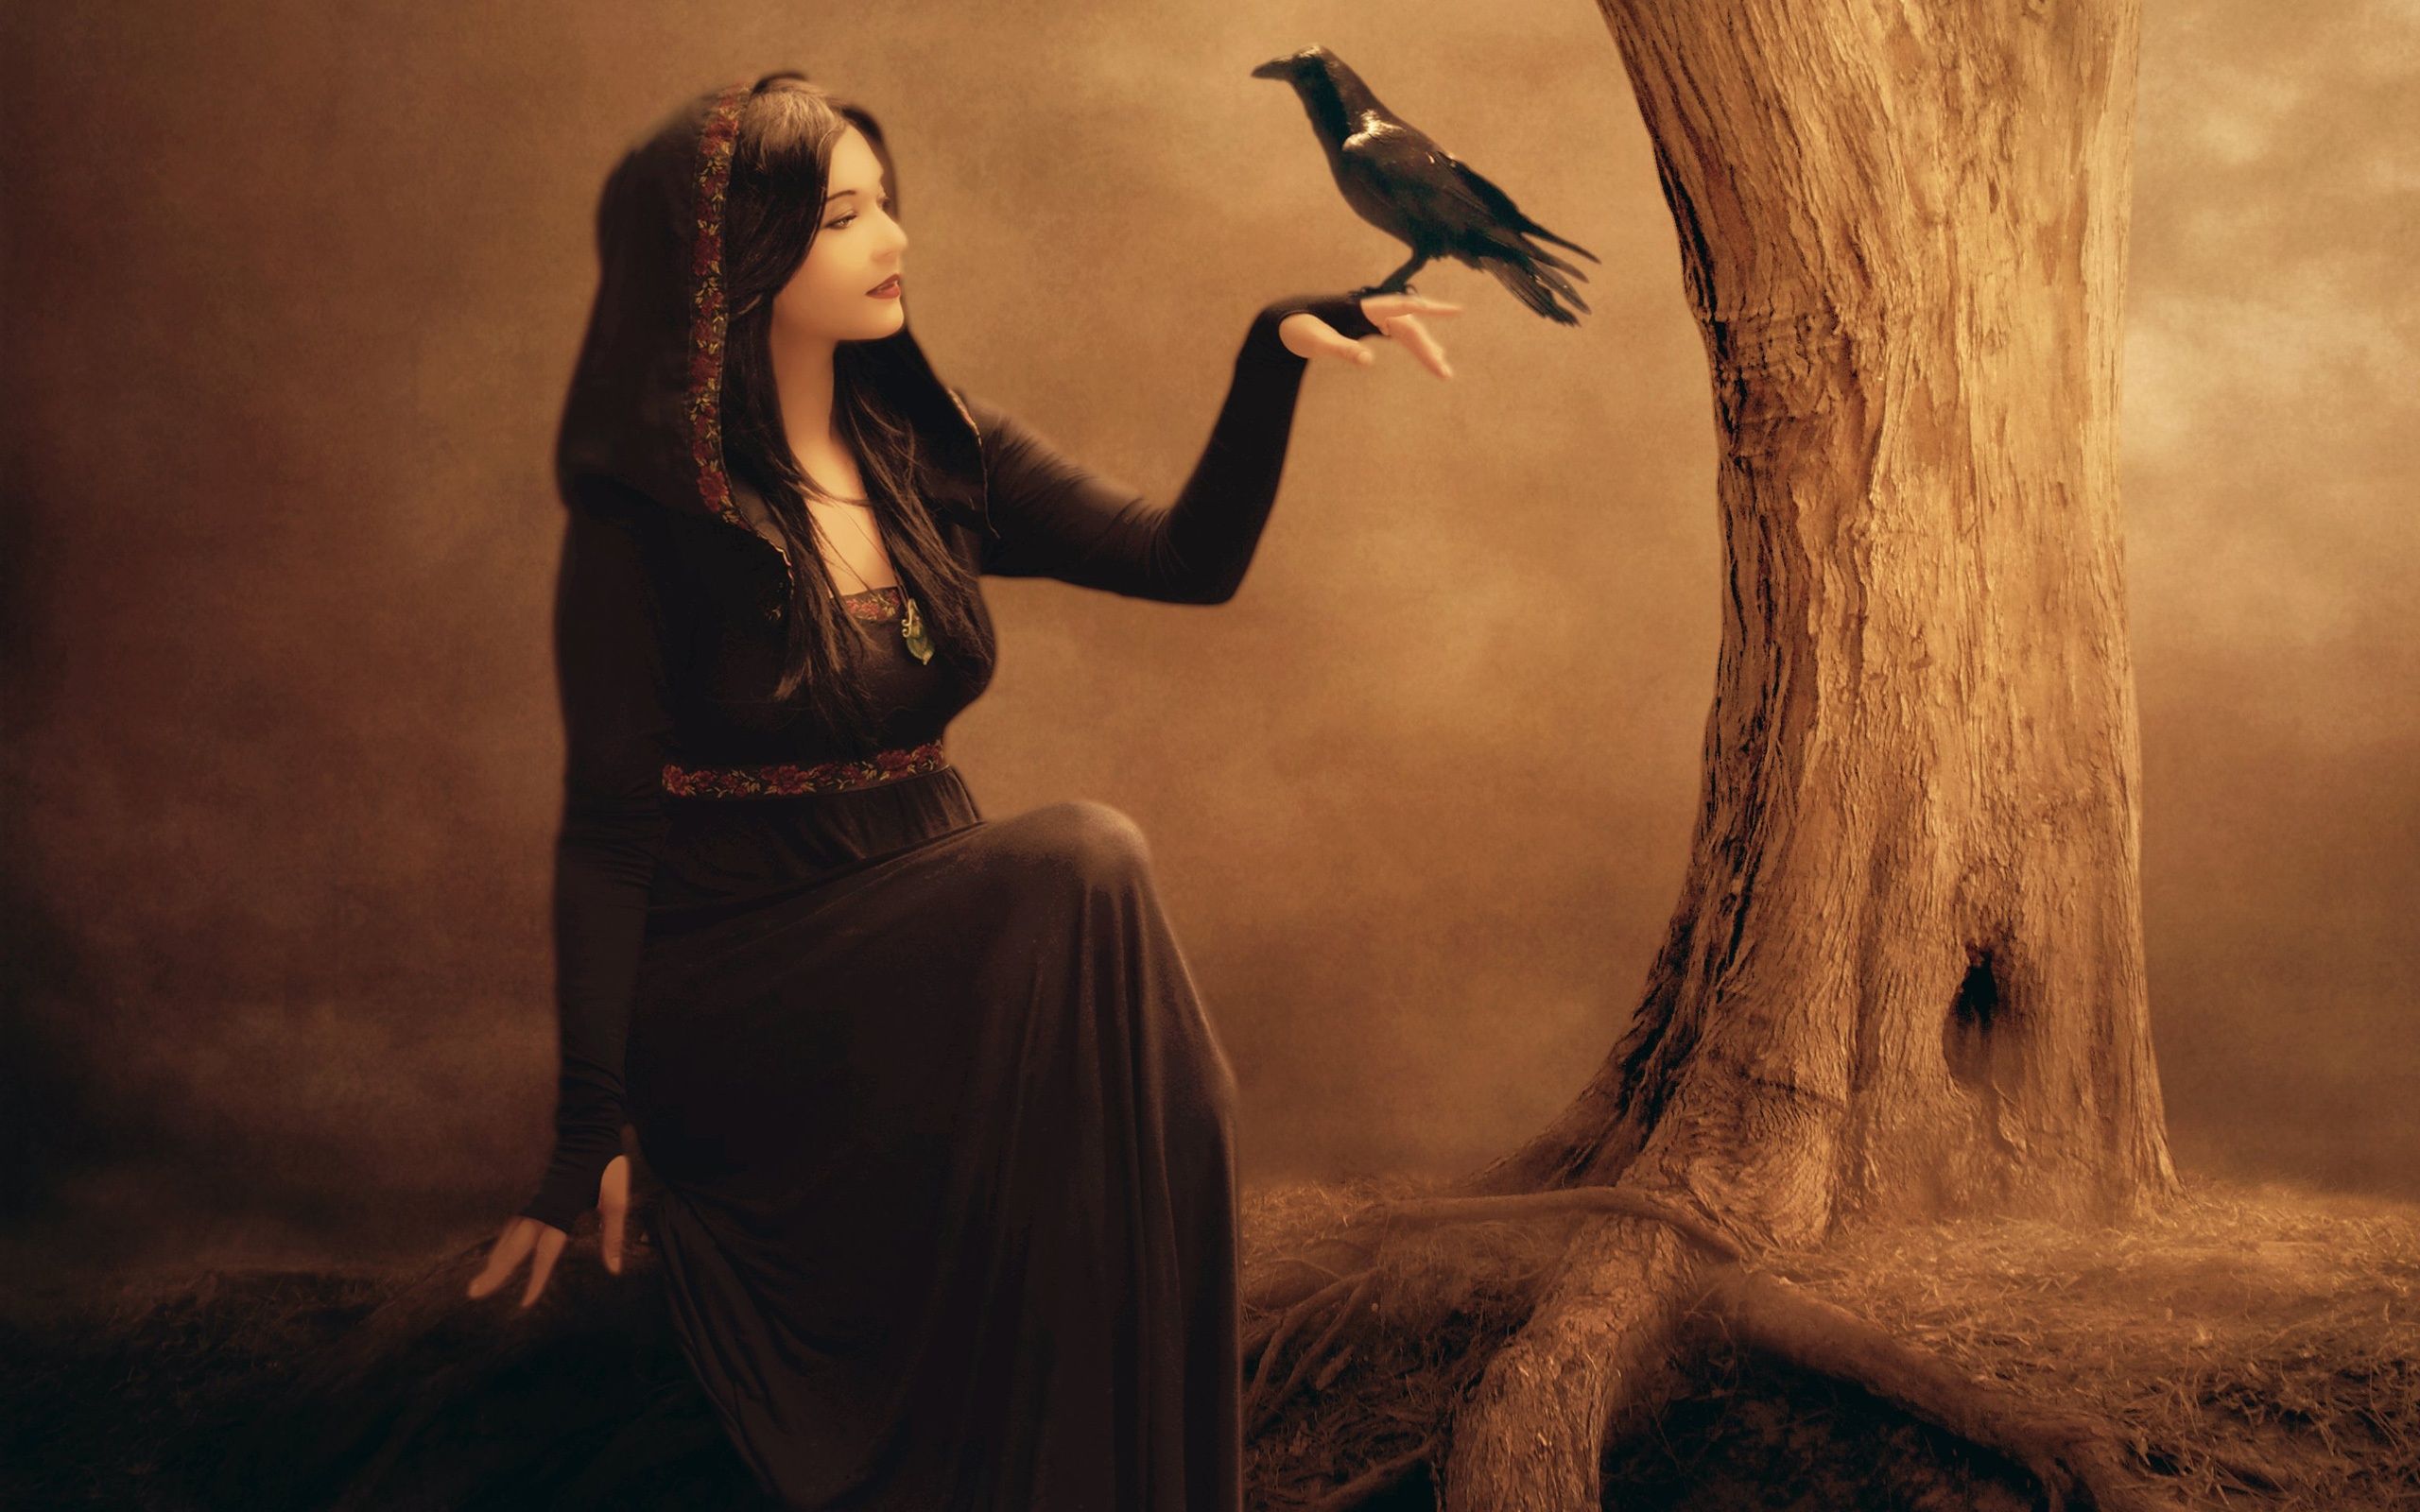 2560x1600 Wallpaper Beautiful Fantasy Girl Raven Tree Witch Black Dress 2560x1600 Hd Picture Image